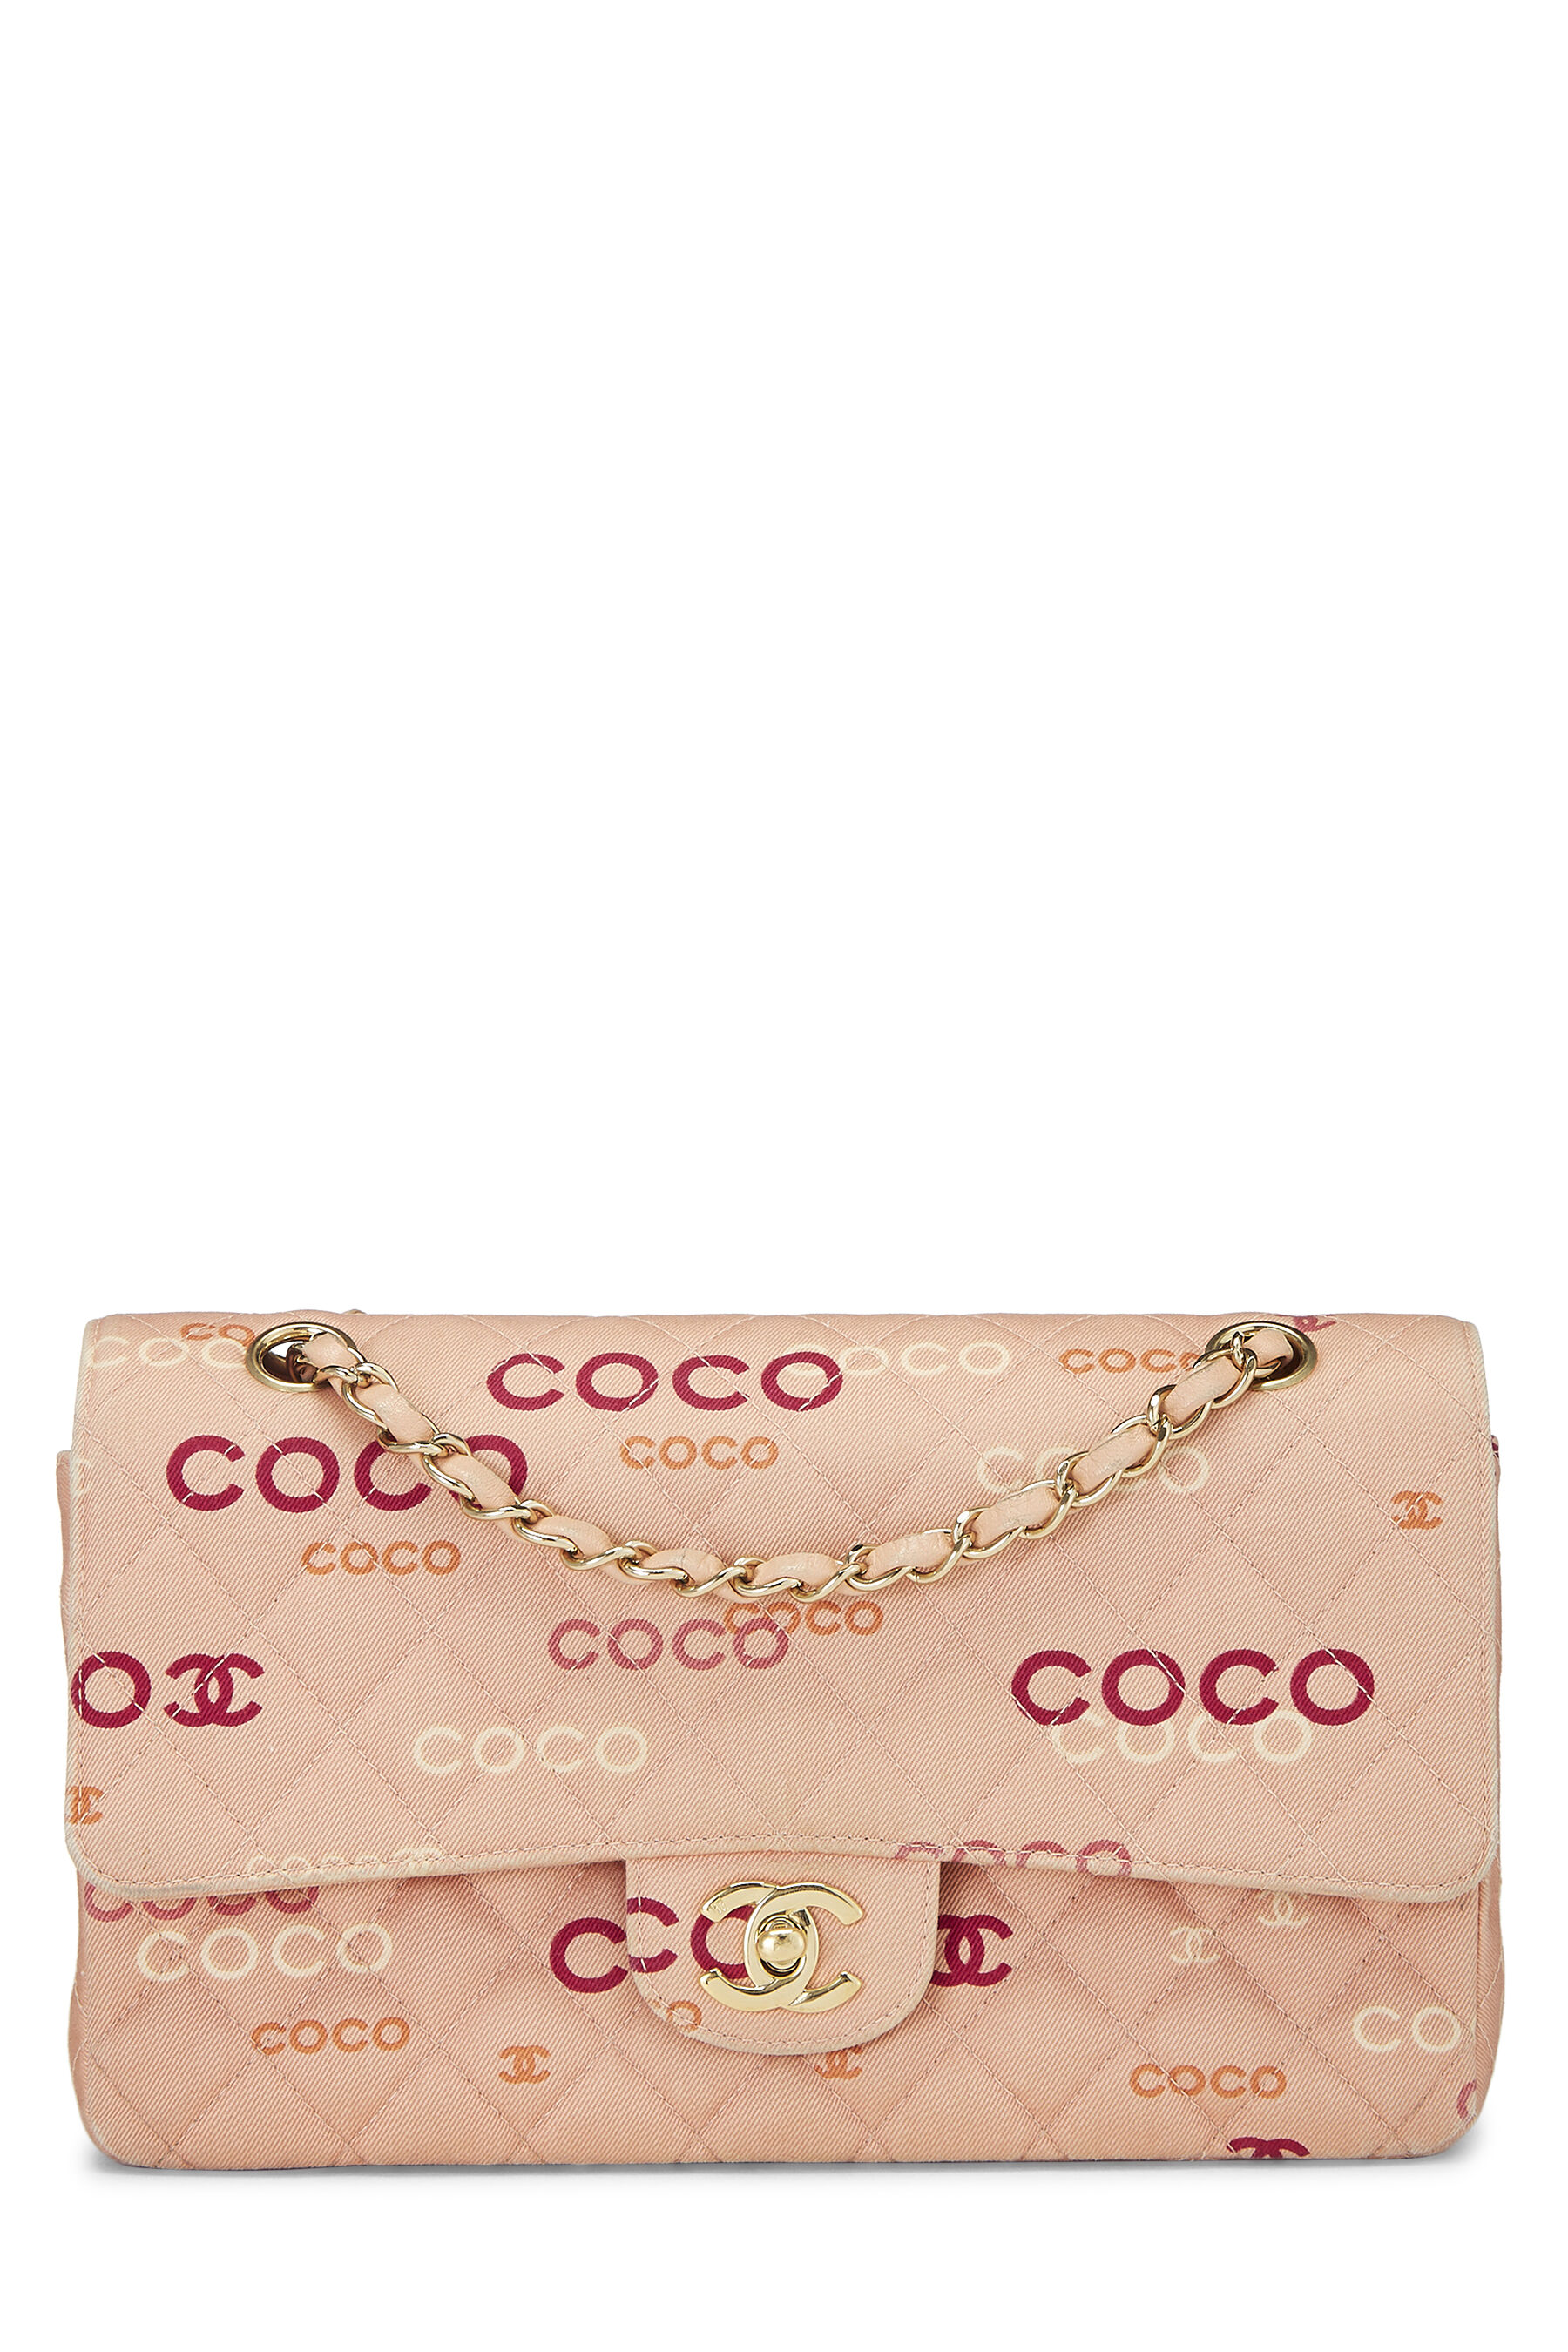 Chanel - Pink Quilted Canvas Coco Classic Double Flap Medium